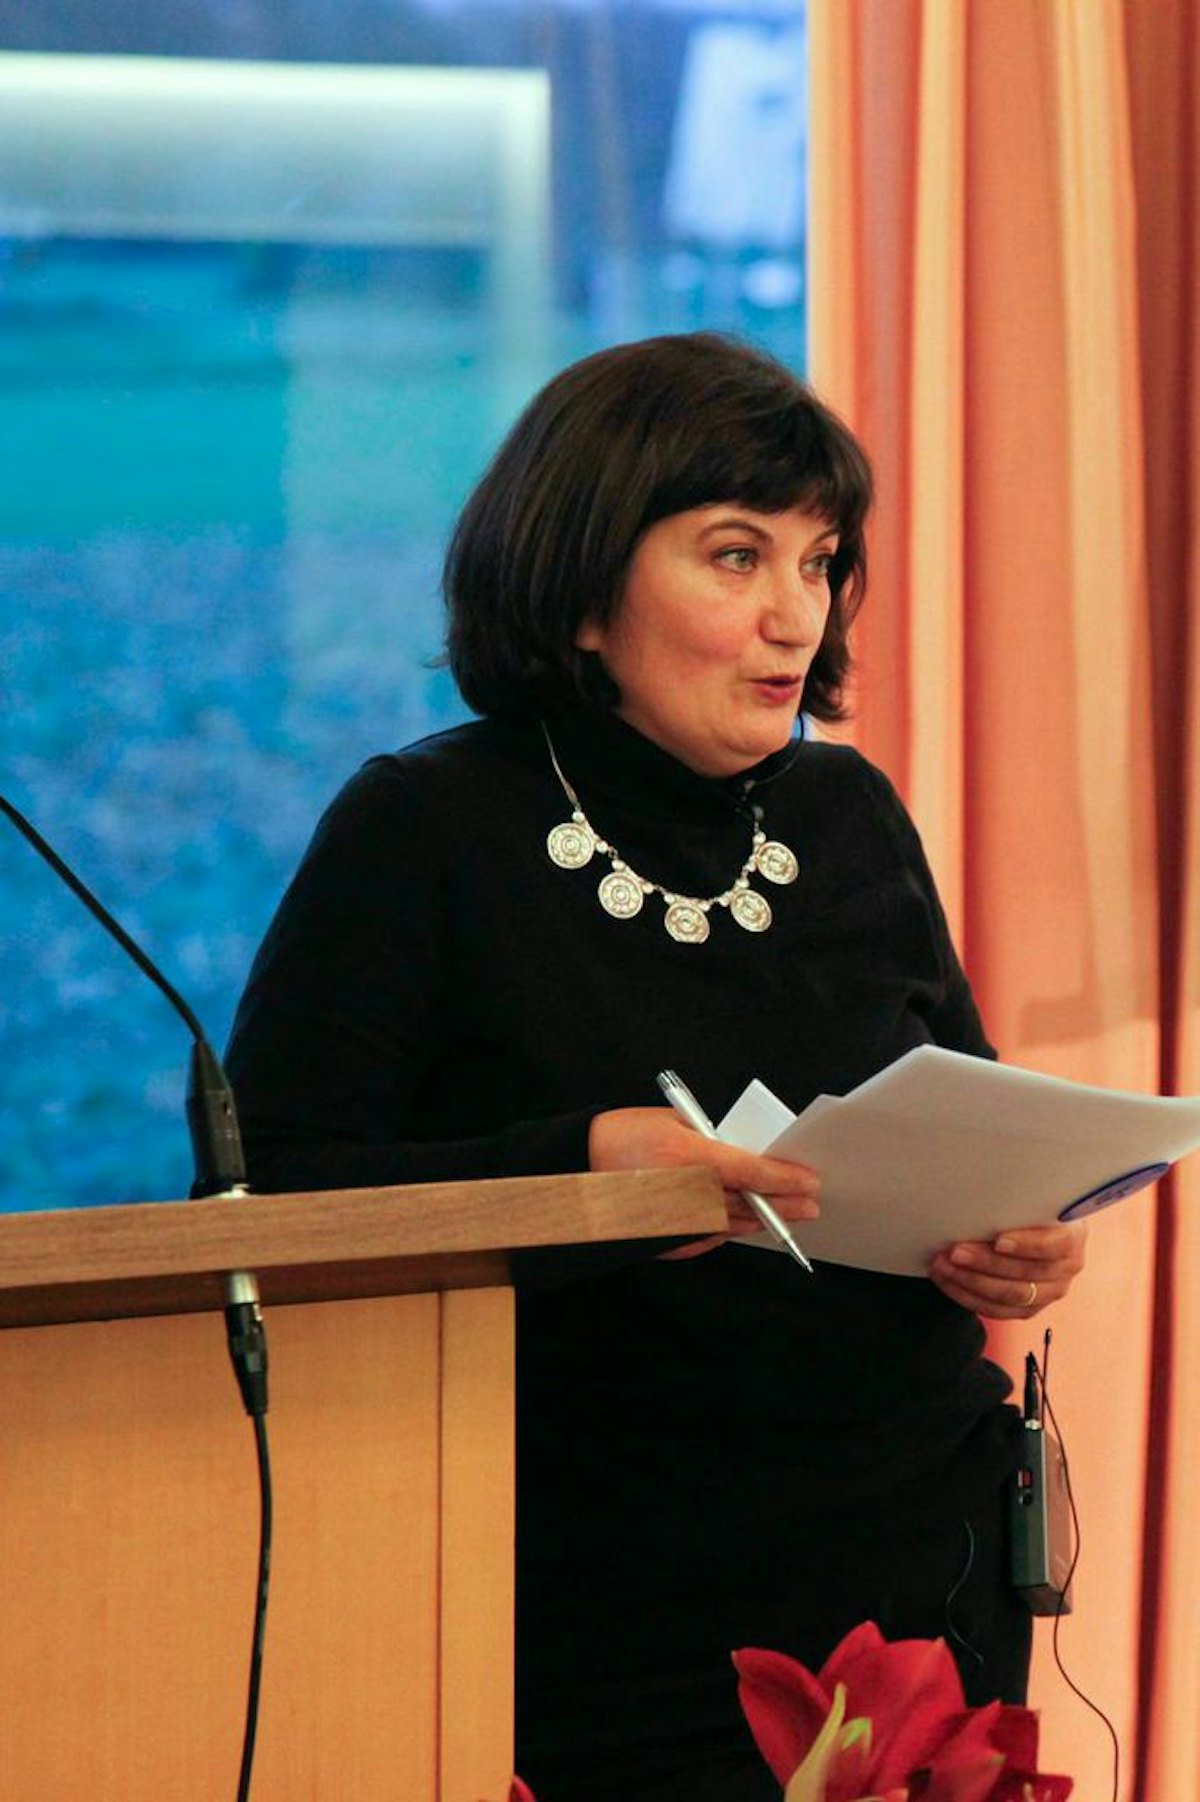 Canan Topcu, a Turkish-born journalist and member of the Neue deutsche Medienmacher (New German Media Makers) moderated the panel discussion at the National Baha'i Centre outside Frankfurt, Germany on 7 December 2014.